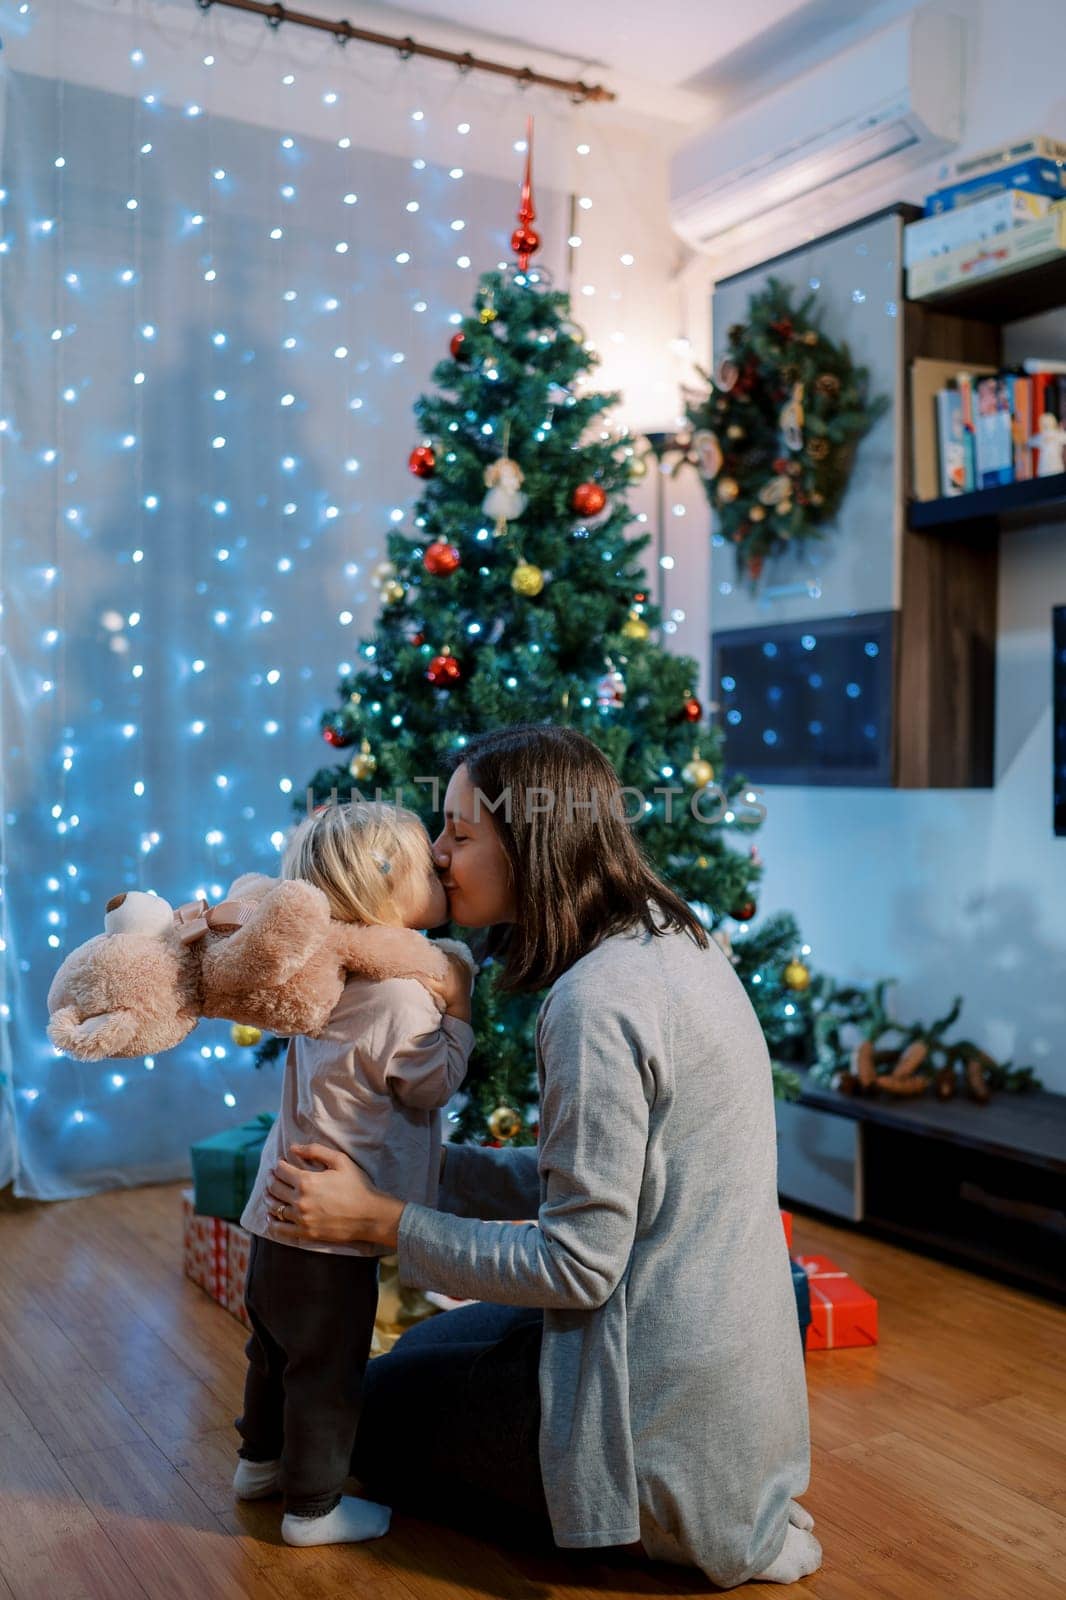 Mom kisses on the cheek a little girl with a teddy bear on her shoulders sitting near a sparkling Christmas tree by Nadtochiy